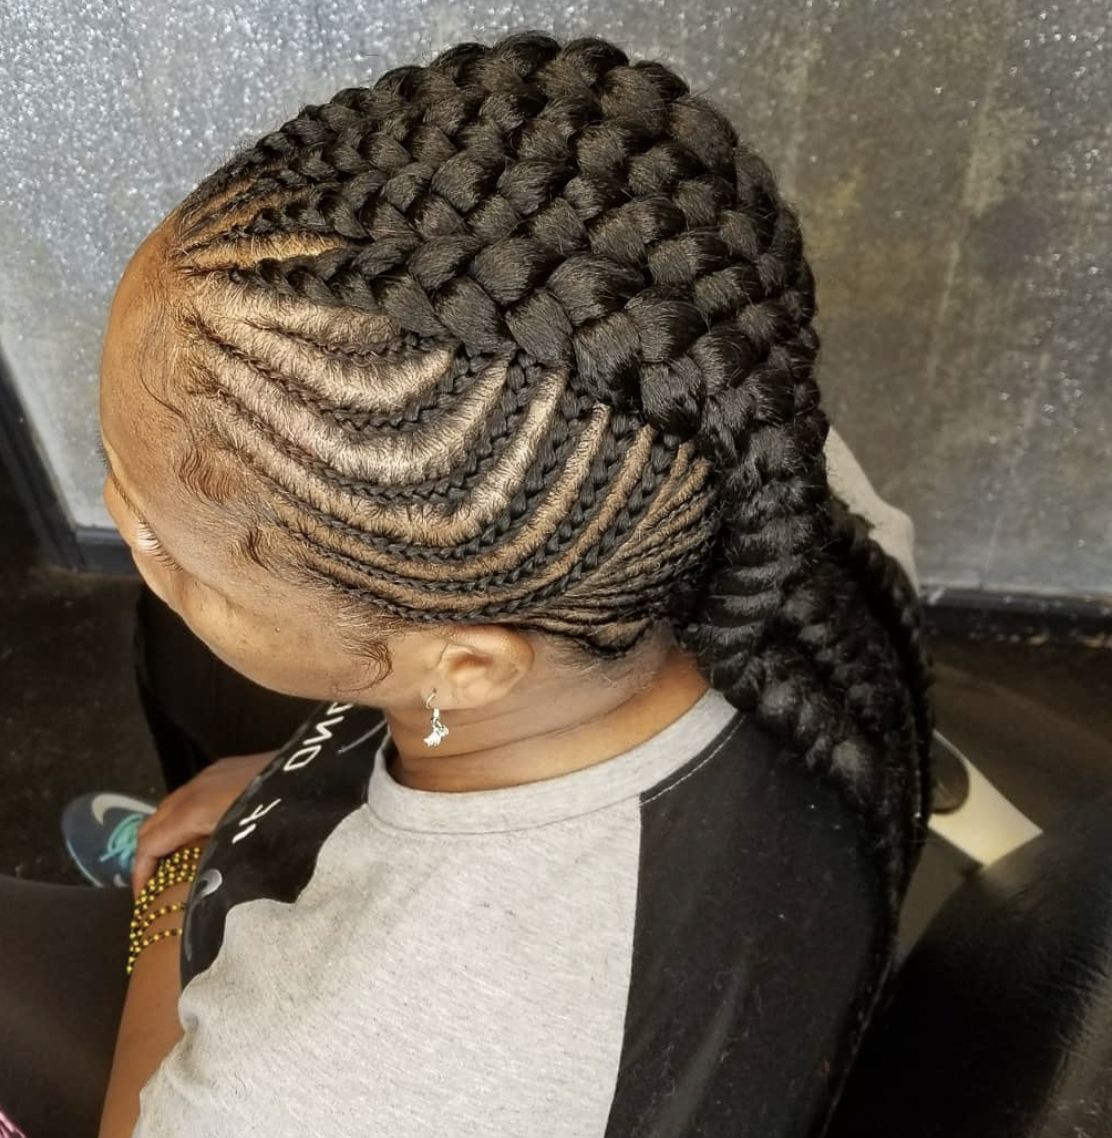 42 Black Braided Hairstyles Perfect For 2022 | Glamour Within Most Popular Really Royal Braid Hairstyles (View 18 of 25)